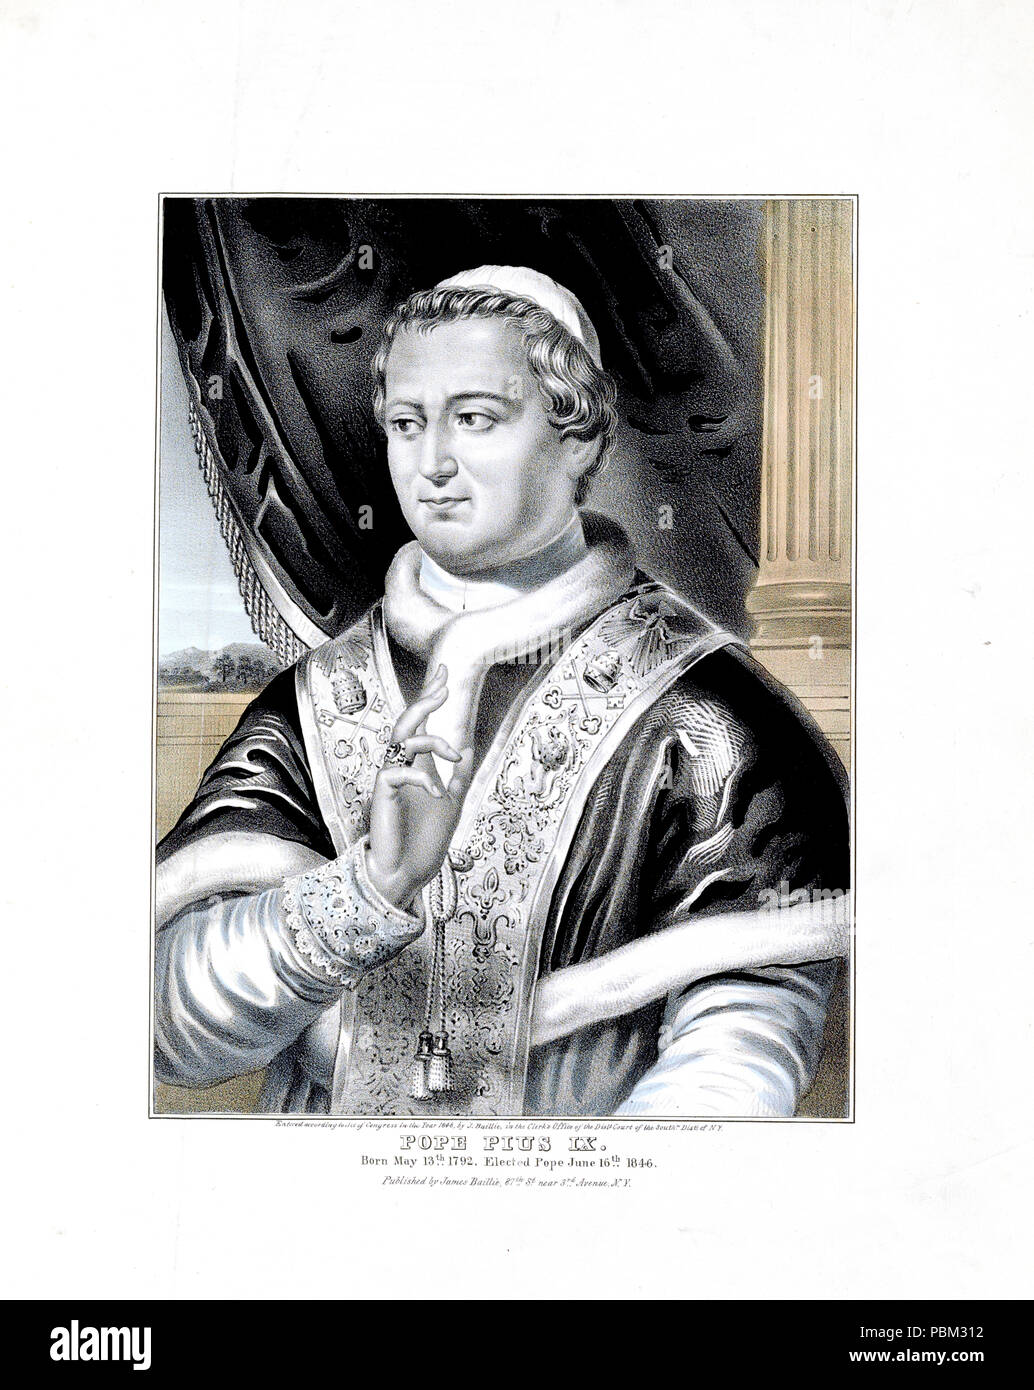 19th century popes Cut Out Stock Images & Pictures - Alamy